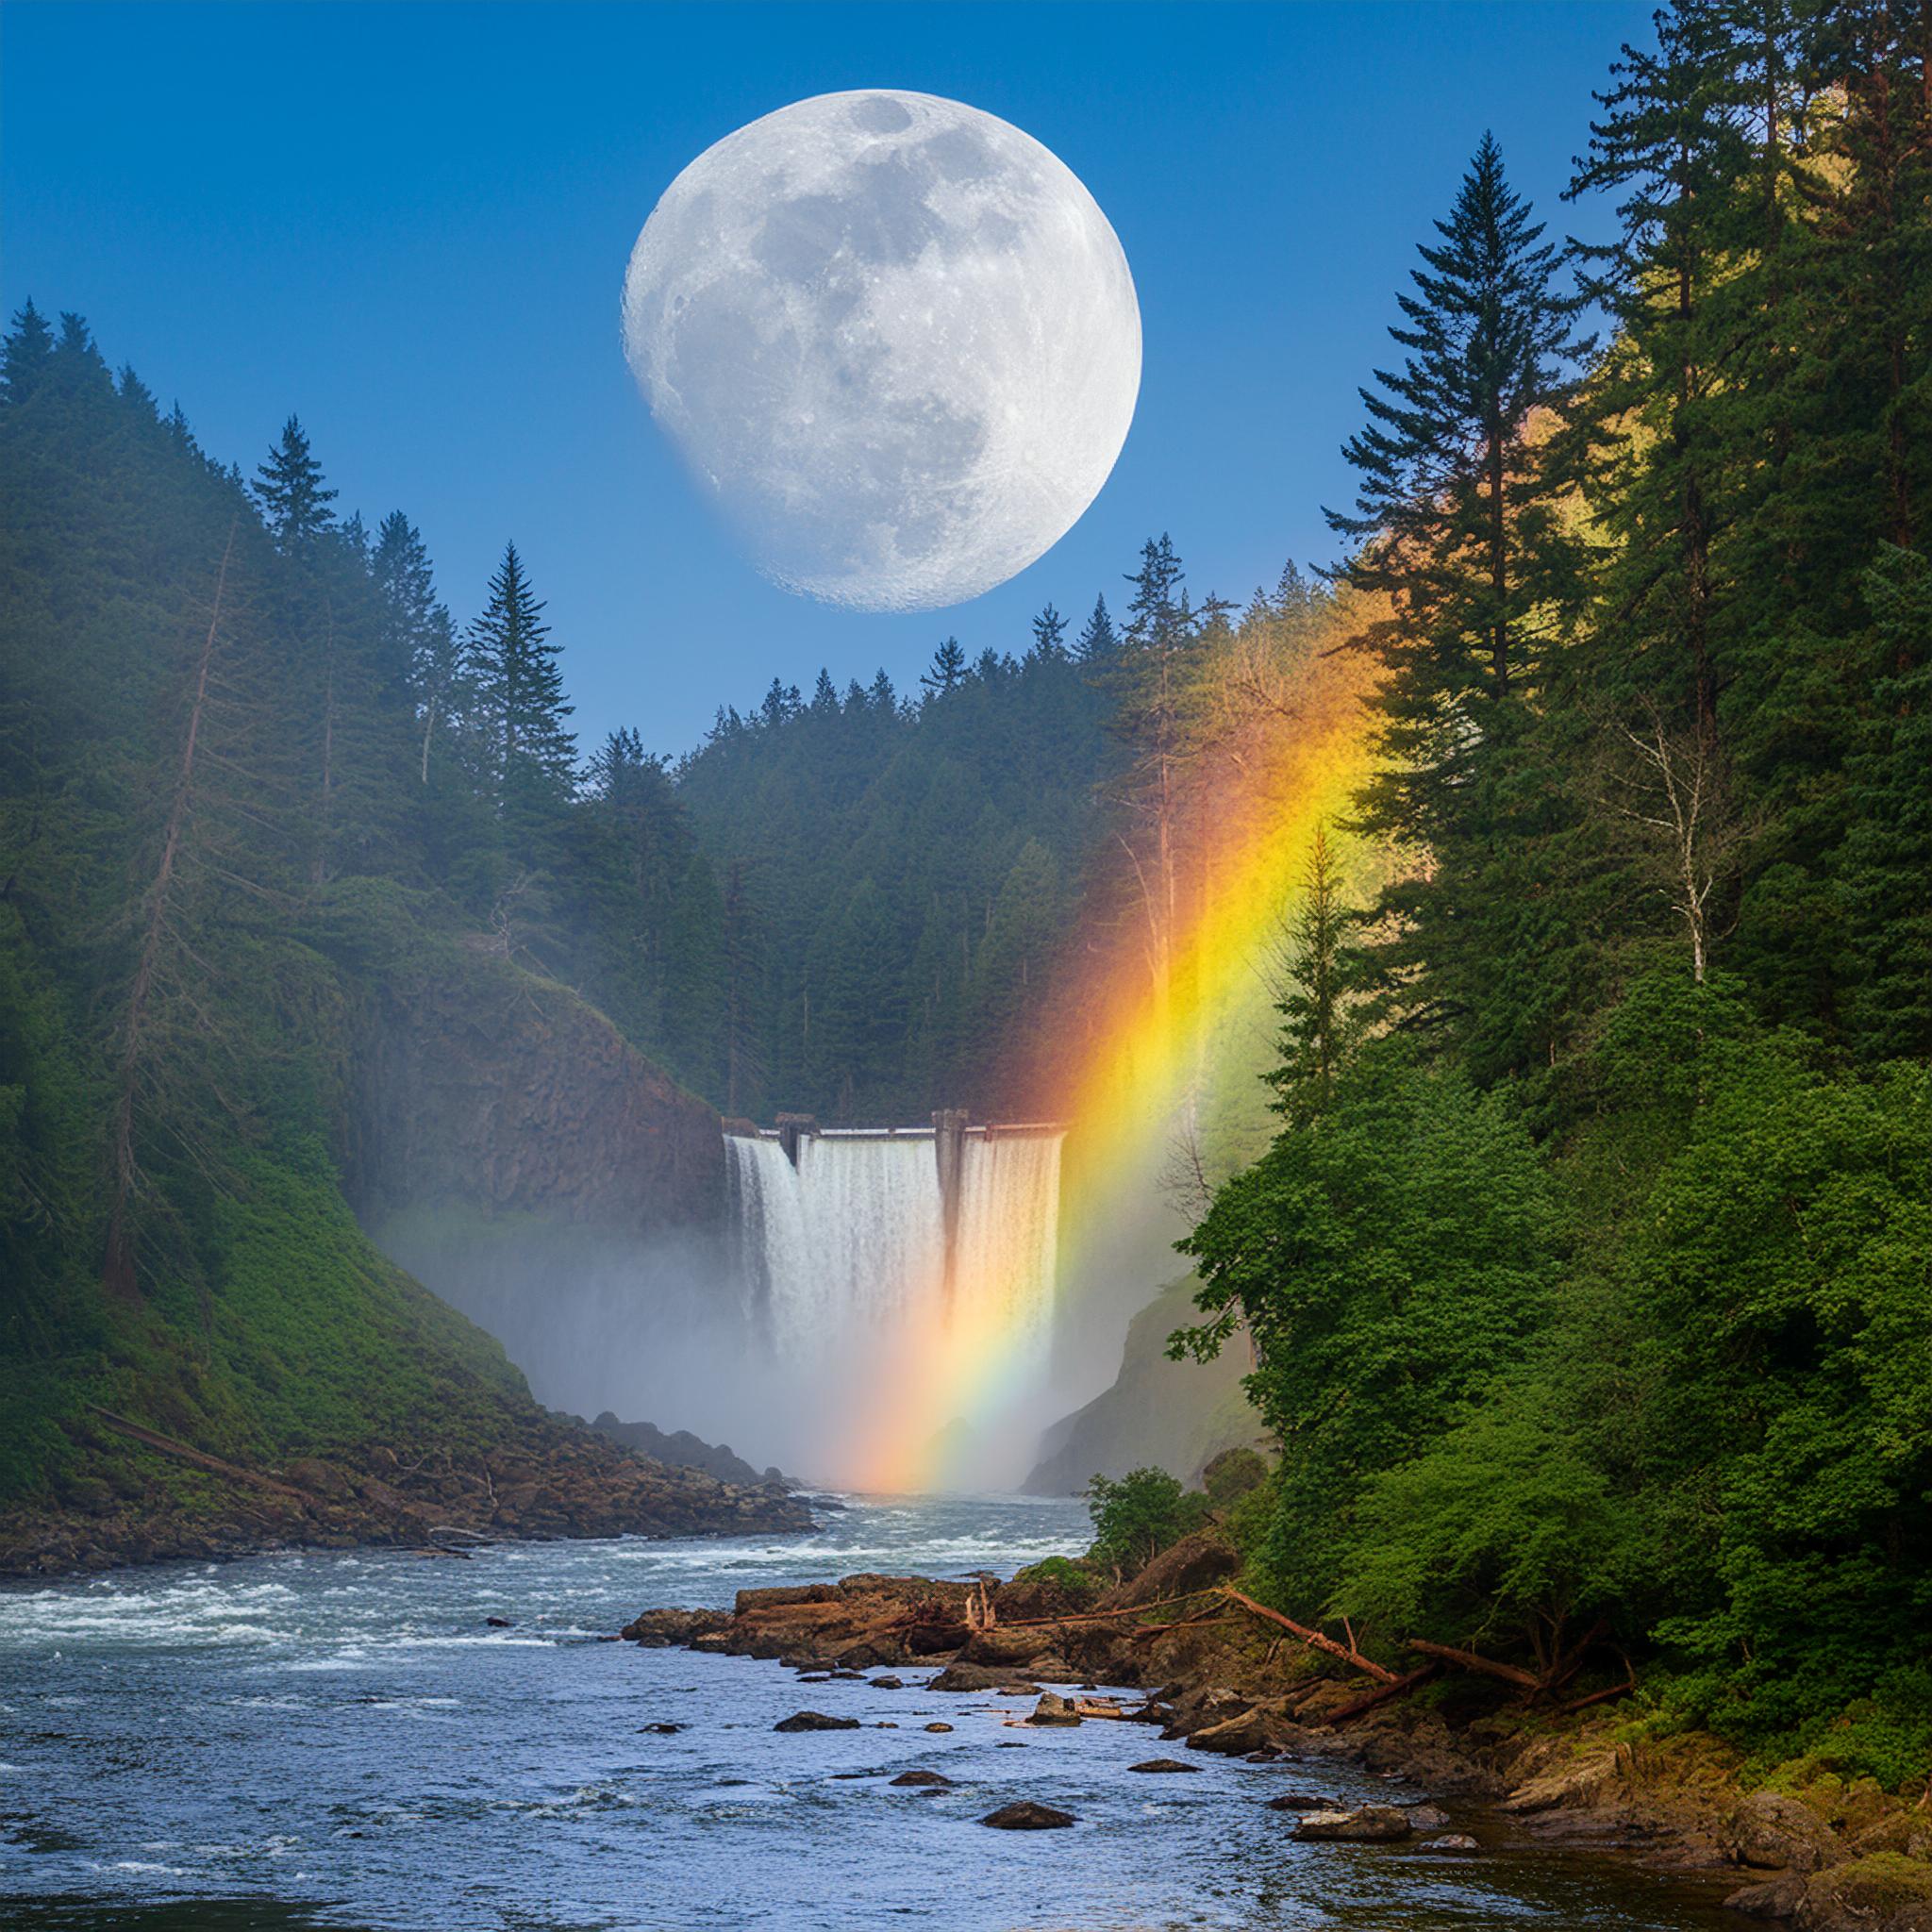 Moonbow over river - inspired by Cumberland Falls moon bows